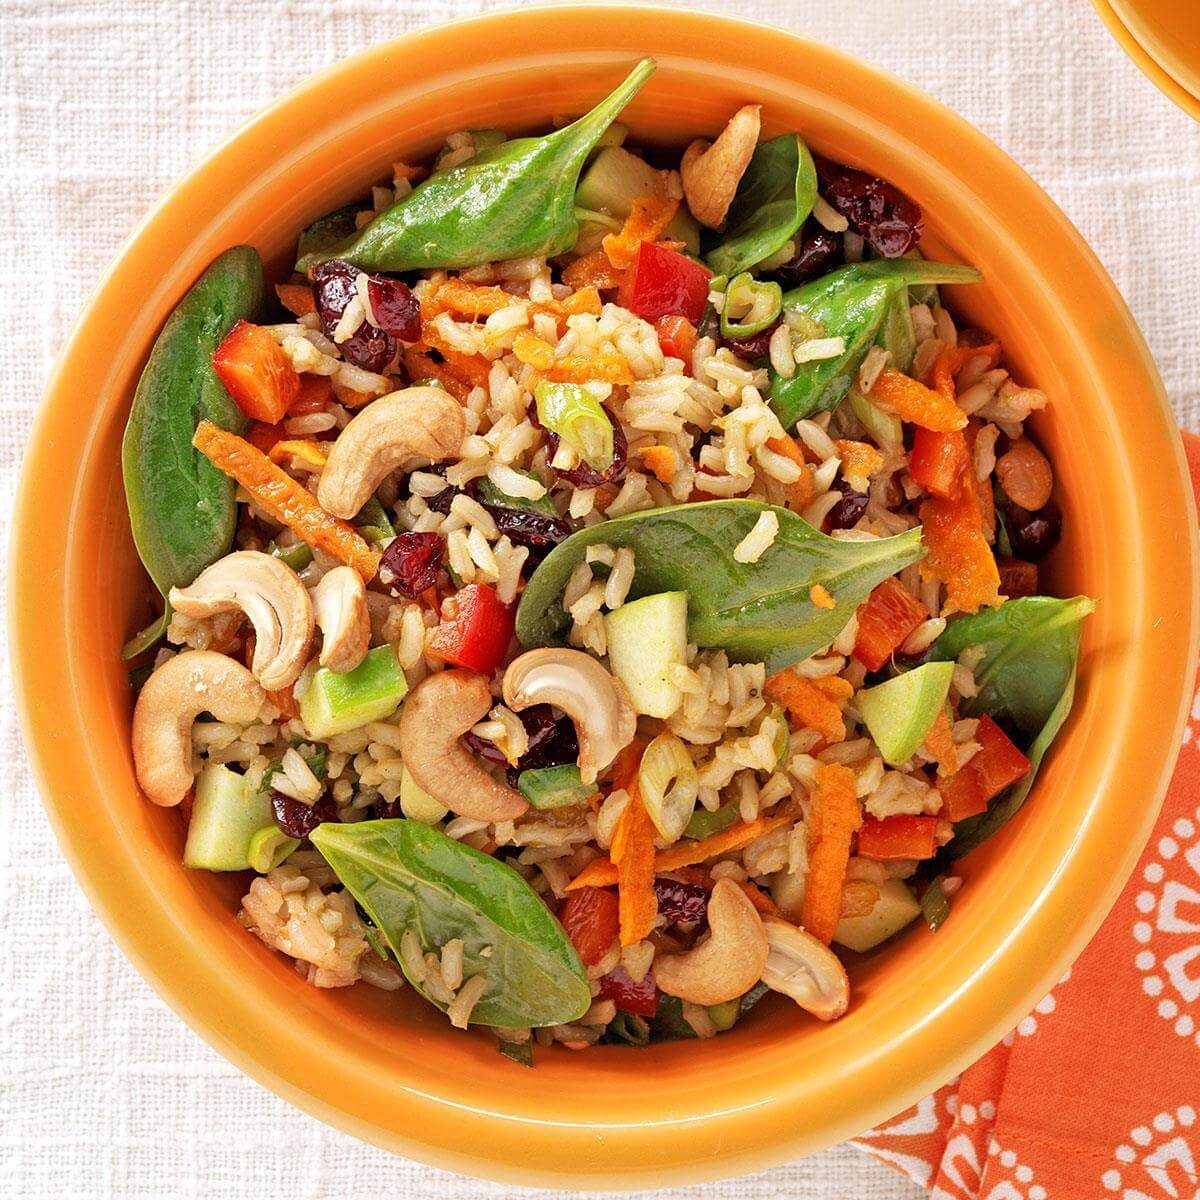 https://www.tasteofhome.com/wp-content/uploads/2017/10/Brown-Rice-Chutney-Salad_exps141228_TH2237243A09_29_7bC_RMS.jpg